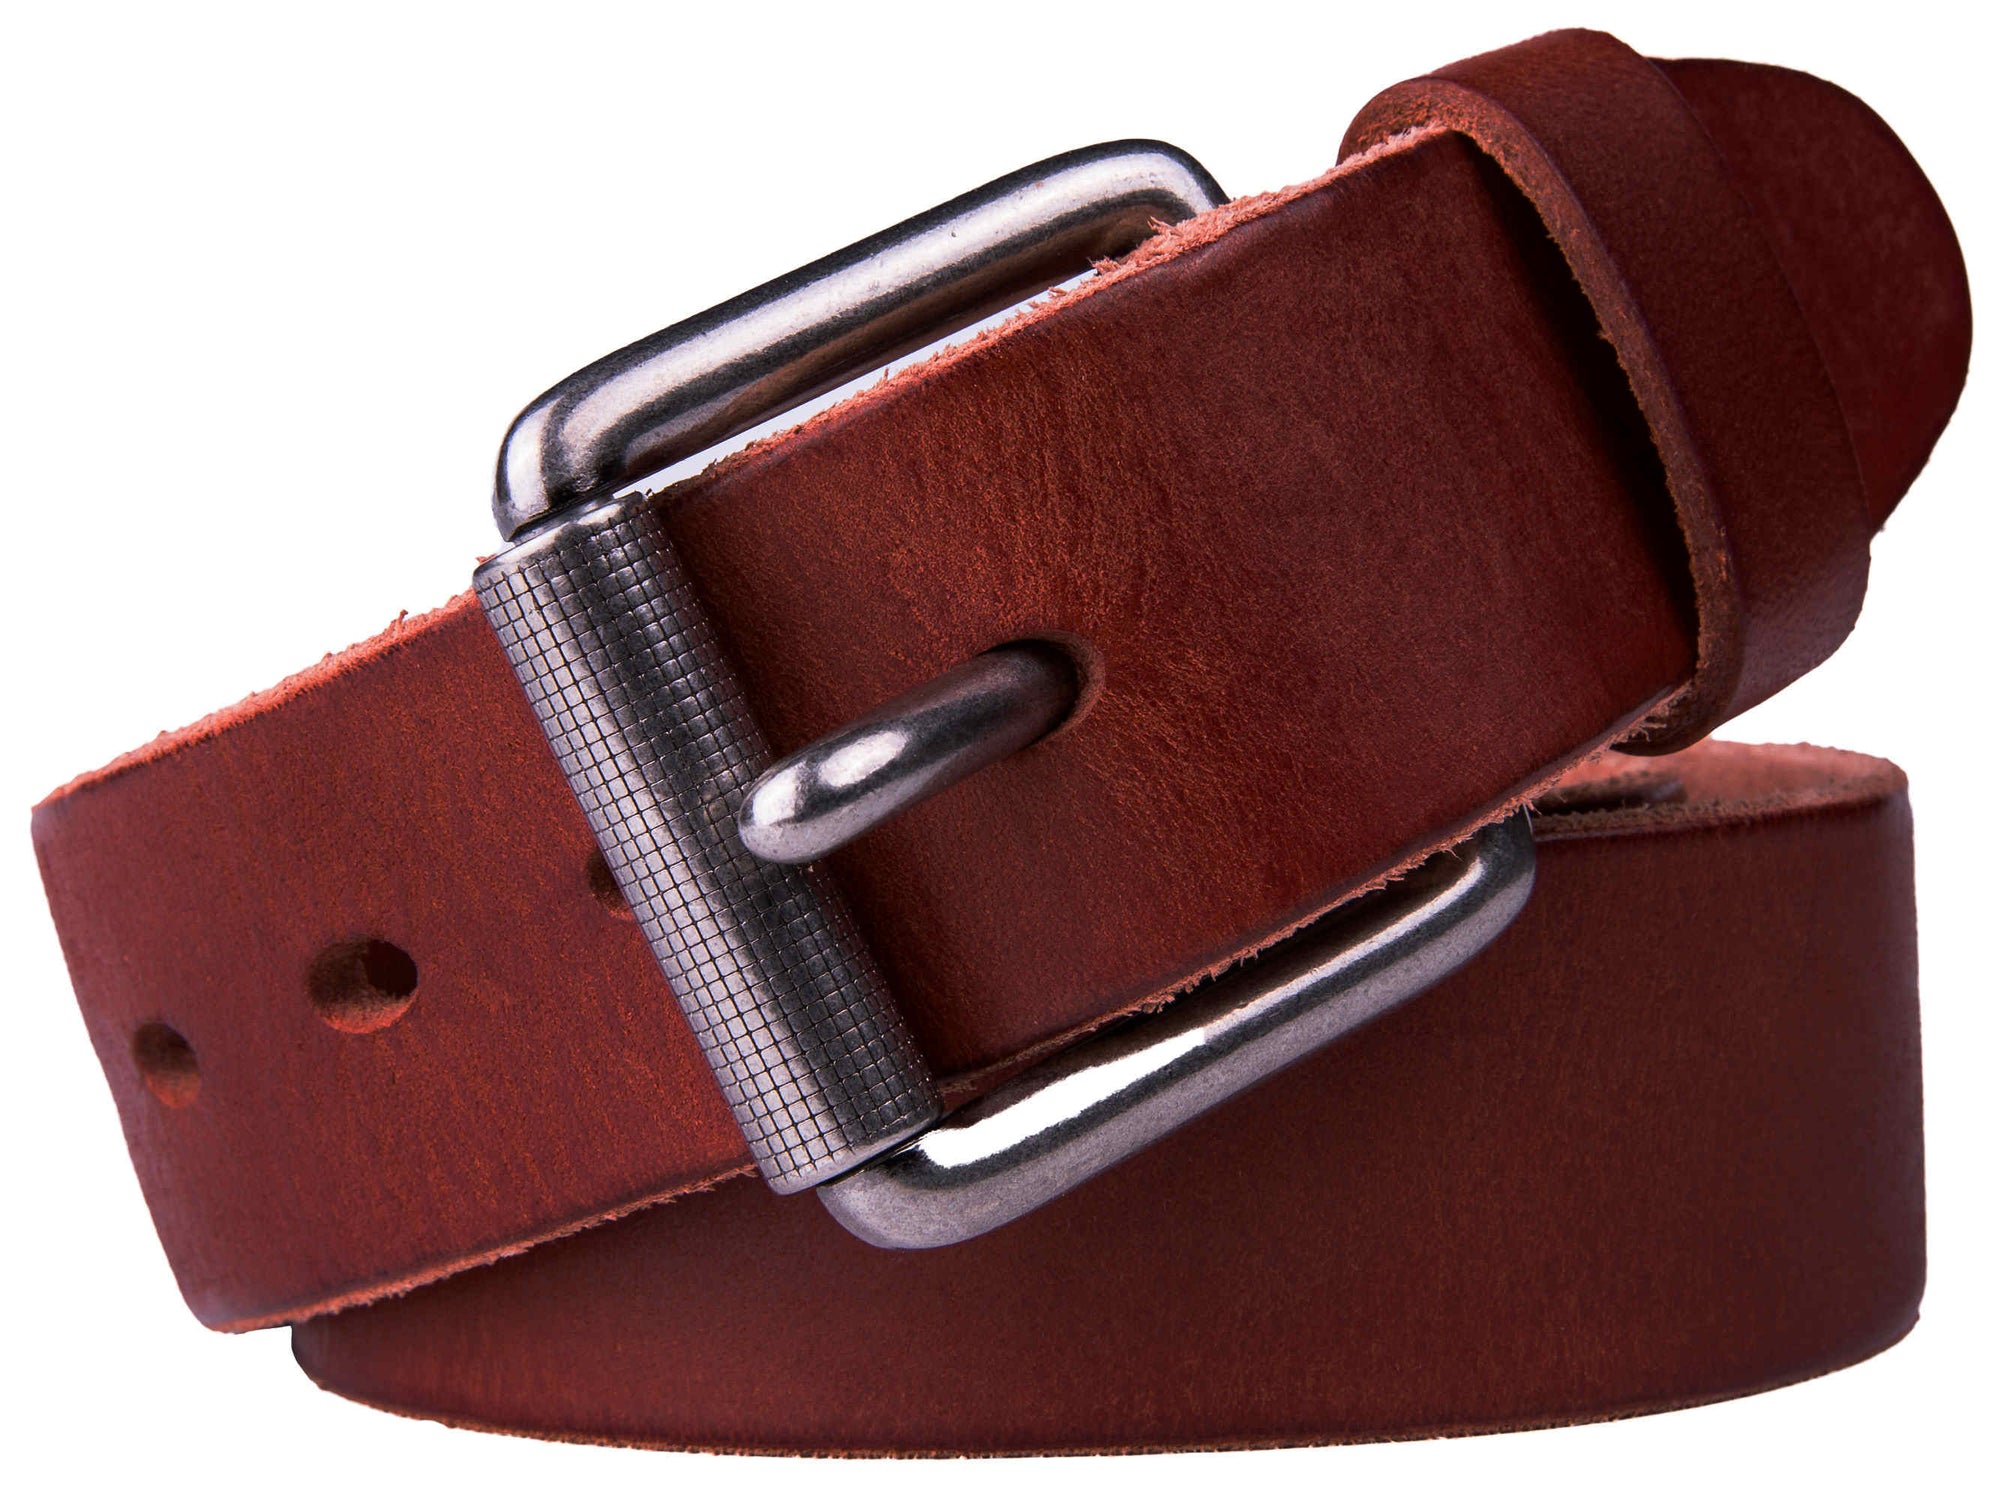 Men's Genuine Leather from Italy Belt Daily Haute